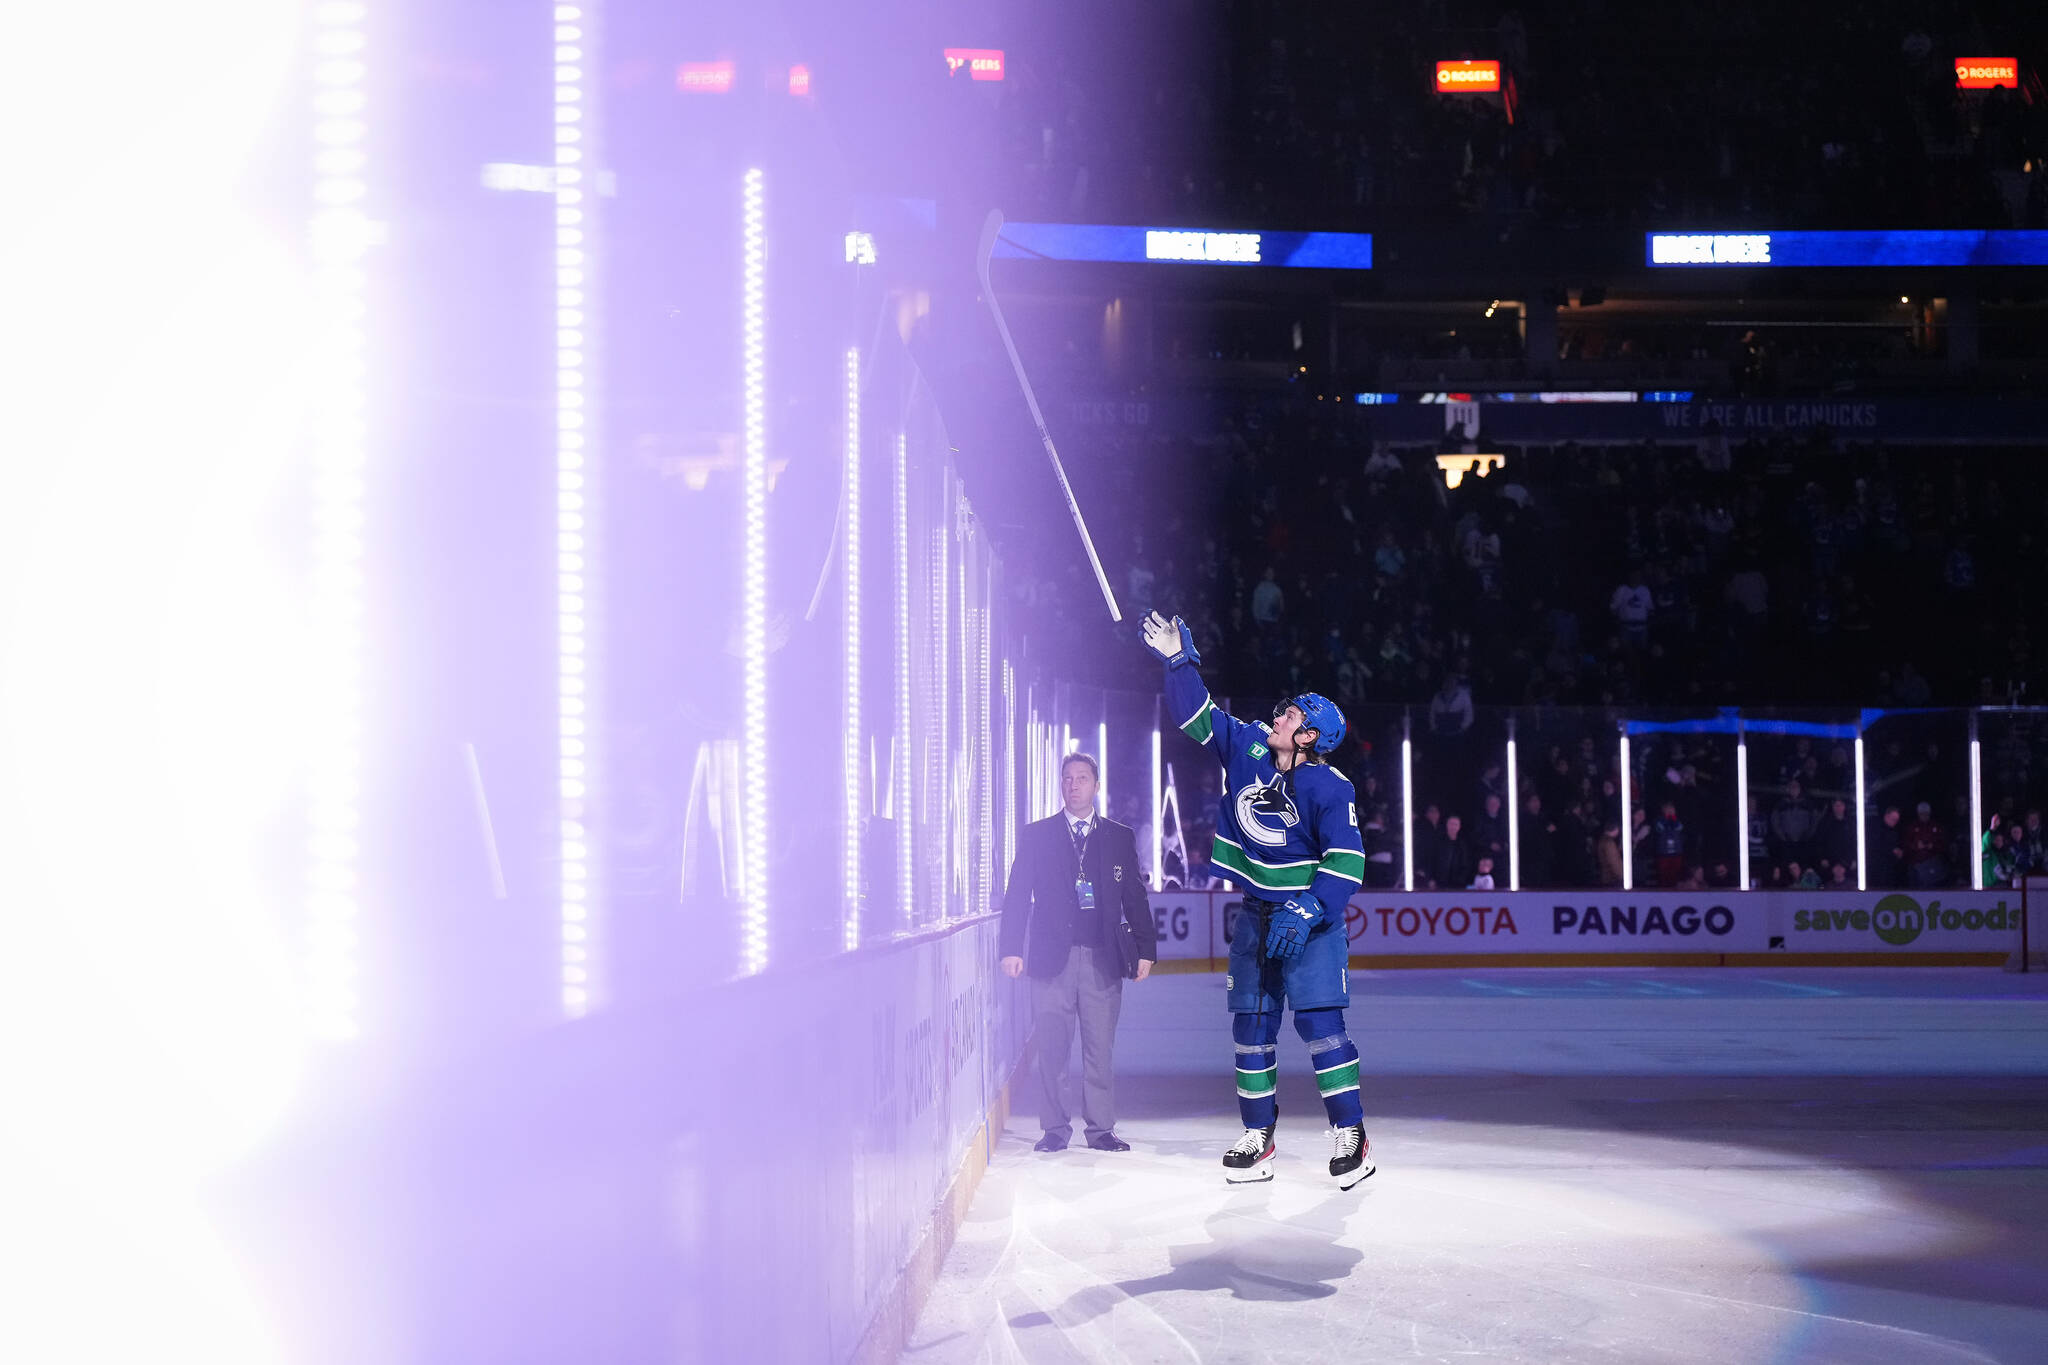 Vancouver Canucks’ Brock Boeser tosses a stick into the crowd after being named the first star of the game after Vancouver defeated the Dallas Stars during an NHL hockey game in Vancouver, on Tuesday, March 14, 2023. THE CANADIAN PRESS/Darryl Dyck